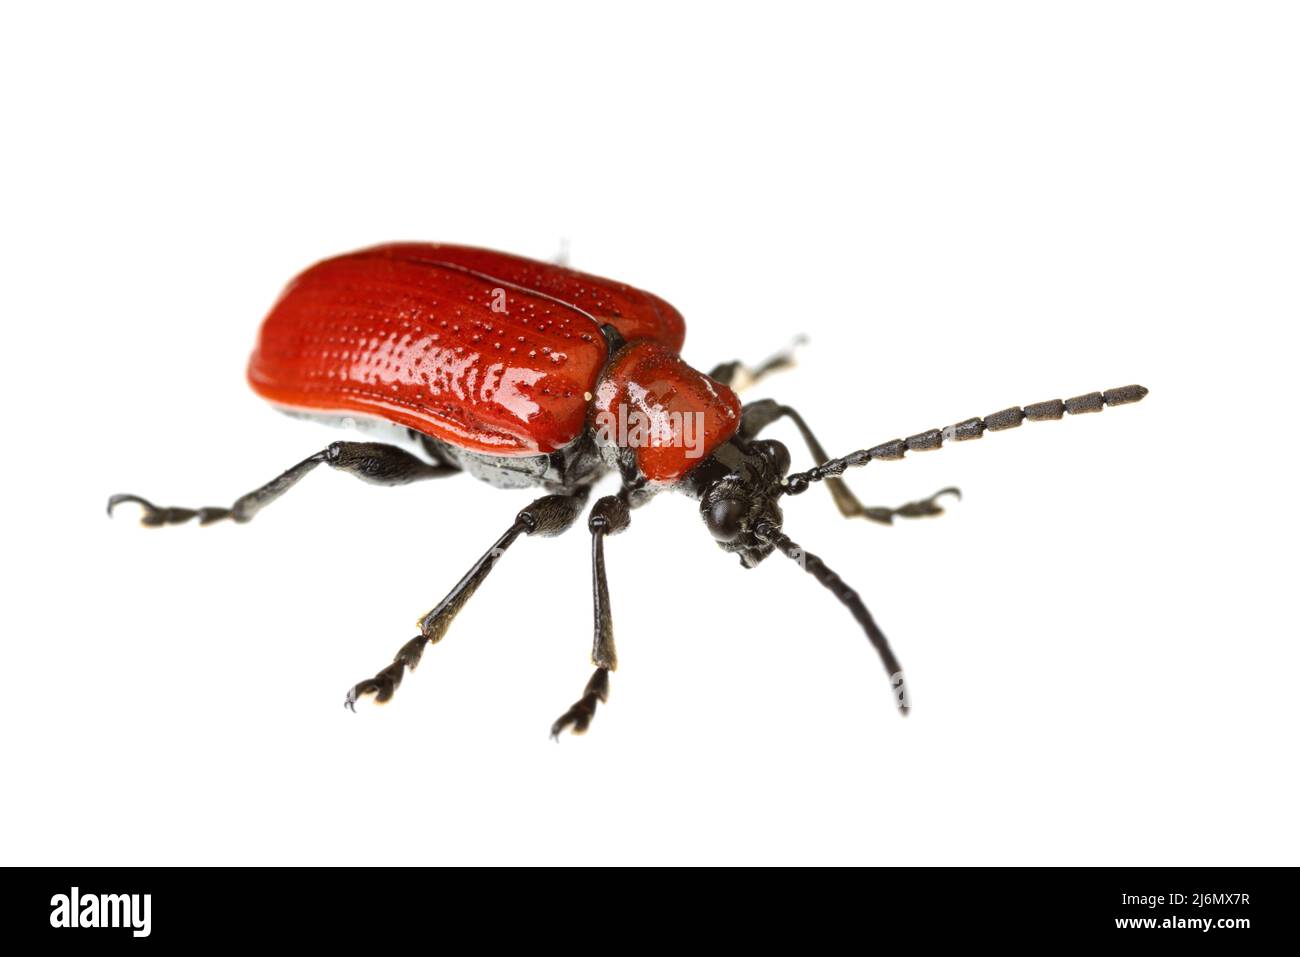 insects of europe - beetles: top view of scarlet lily beetle ( Lilioceris lili ) german Lilienhaehnchen) isolated on white background Stock Photo